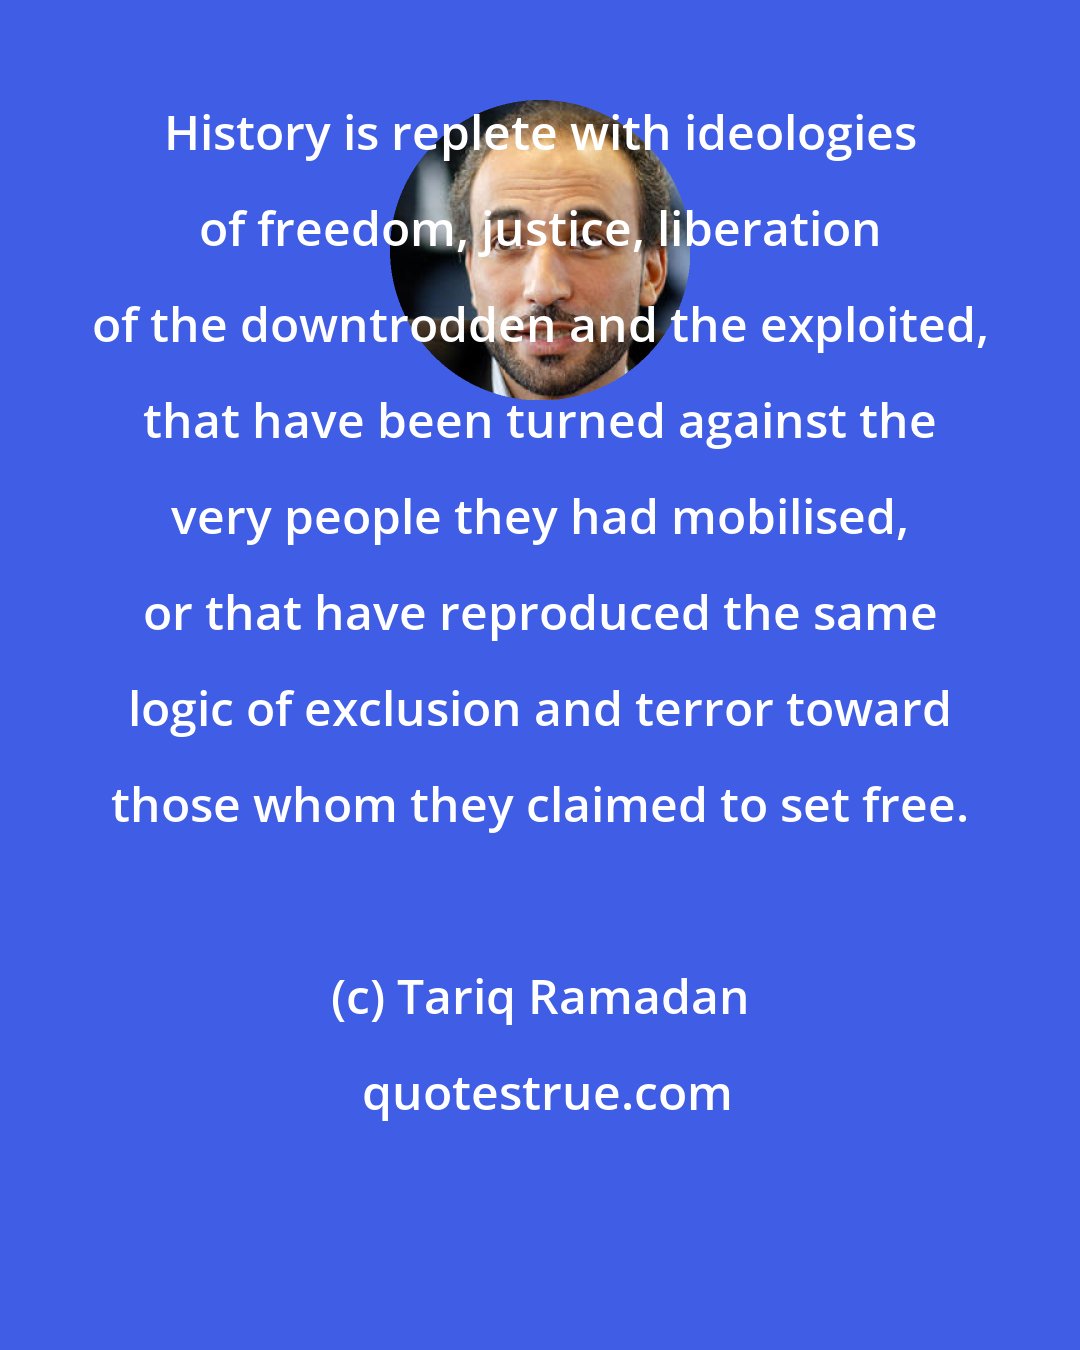 Tariq Ramadan: History is replete with ideologies of freedom, justice, liberation of the downtrodden and the exploited, that have been turned against the very people they had mobilised, or that have reproduced the same logic of exclusion and terror toward those whom they claimed to set free.